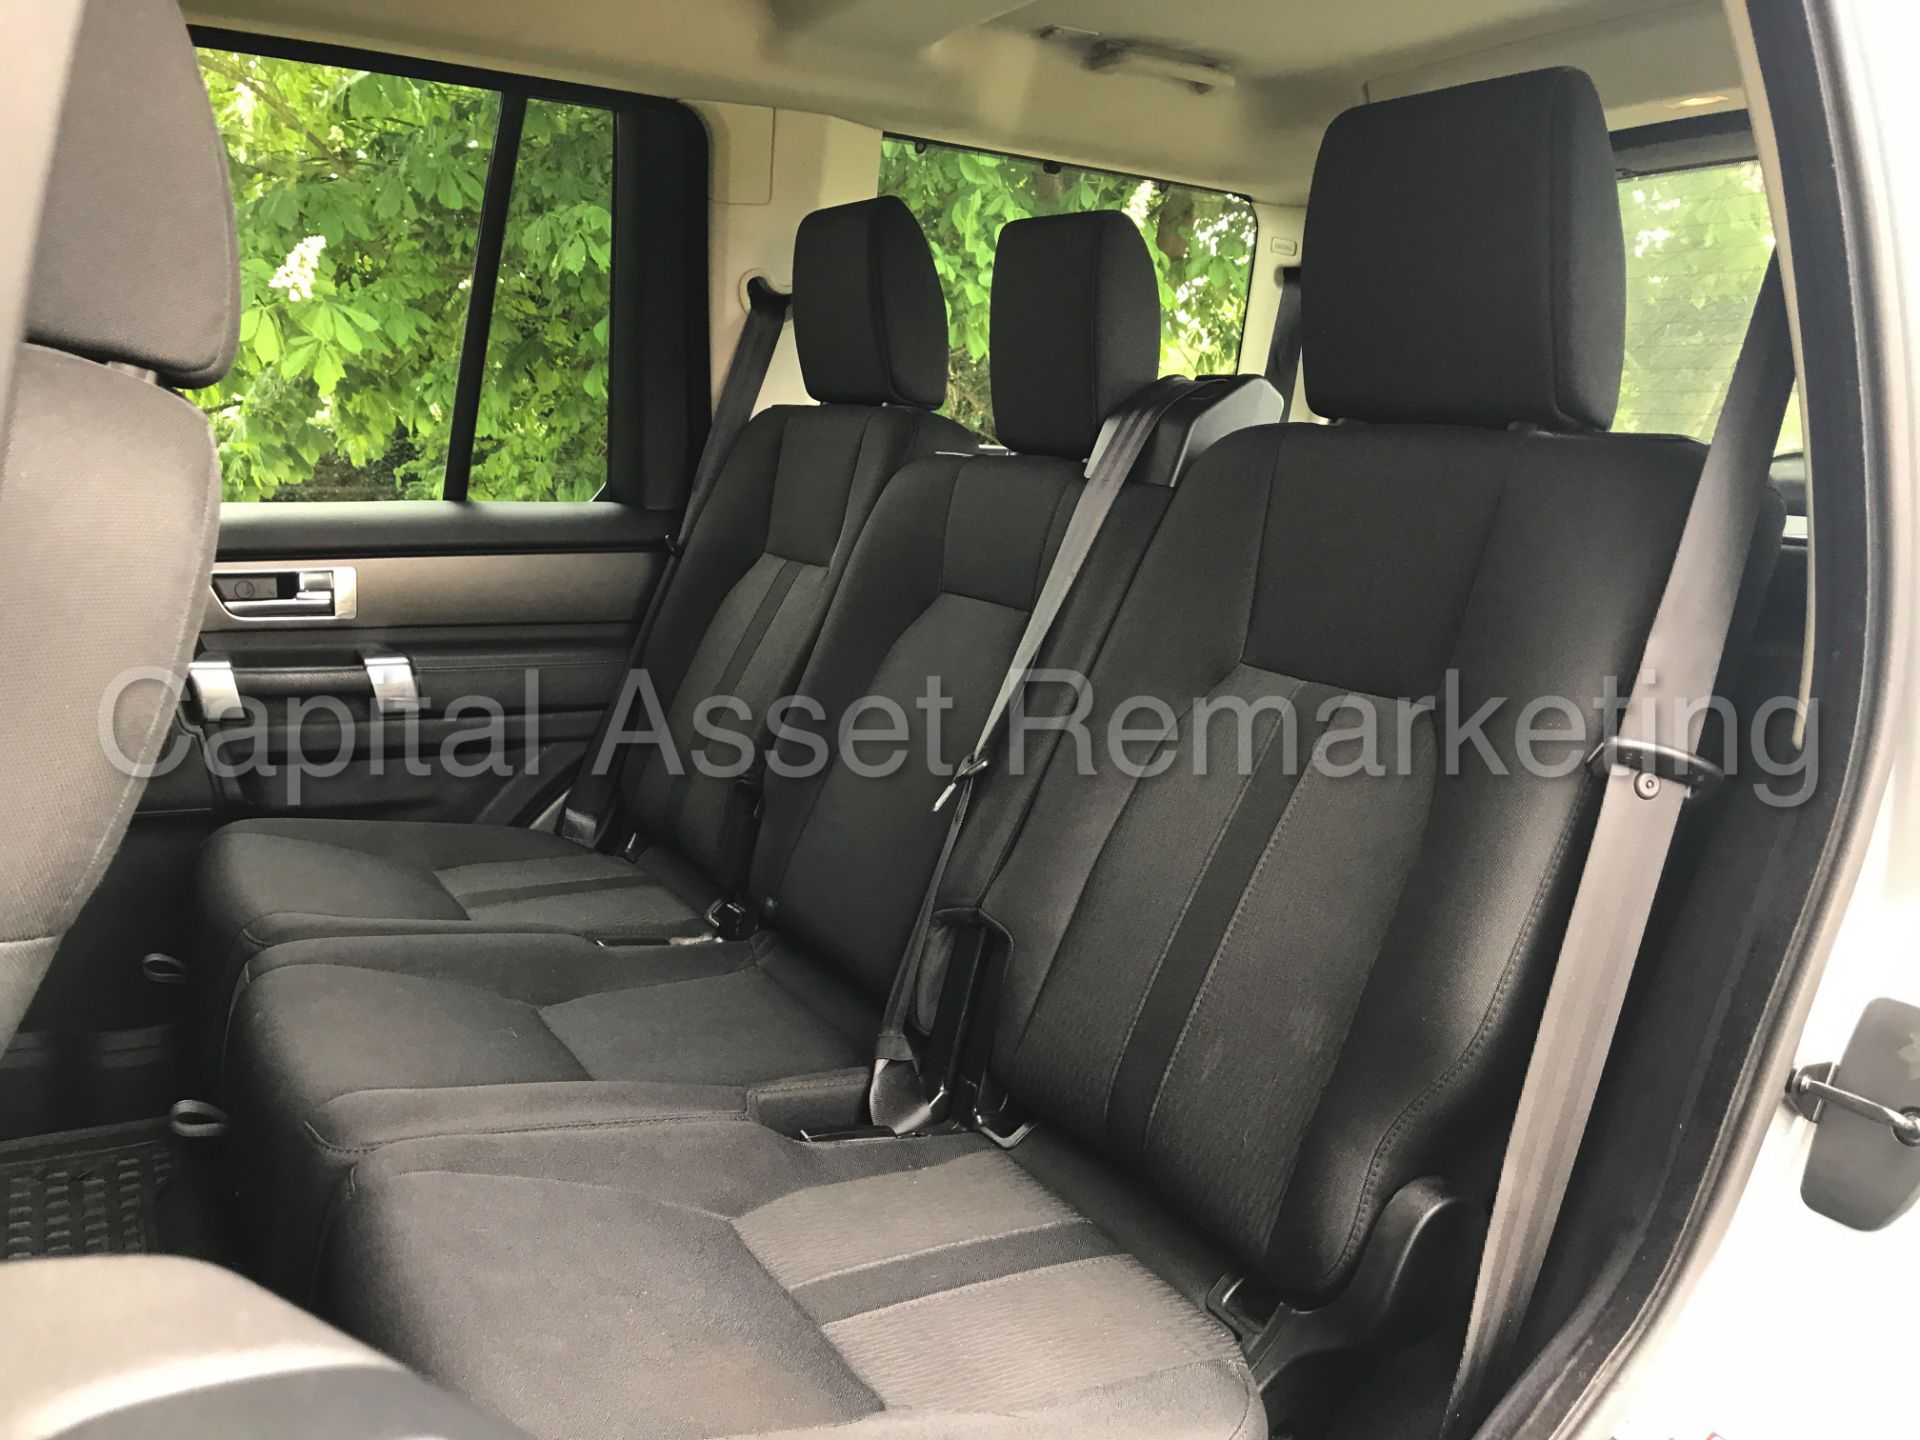 (On sale) LAND ROVER DISCOVERY 4 (2014 MODEL) '3.0 SDV6 -AUTO- 255 BHP - 7 SEATER'(1 OWNER FROM NEW) - Image 32 of 42